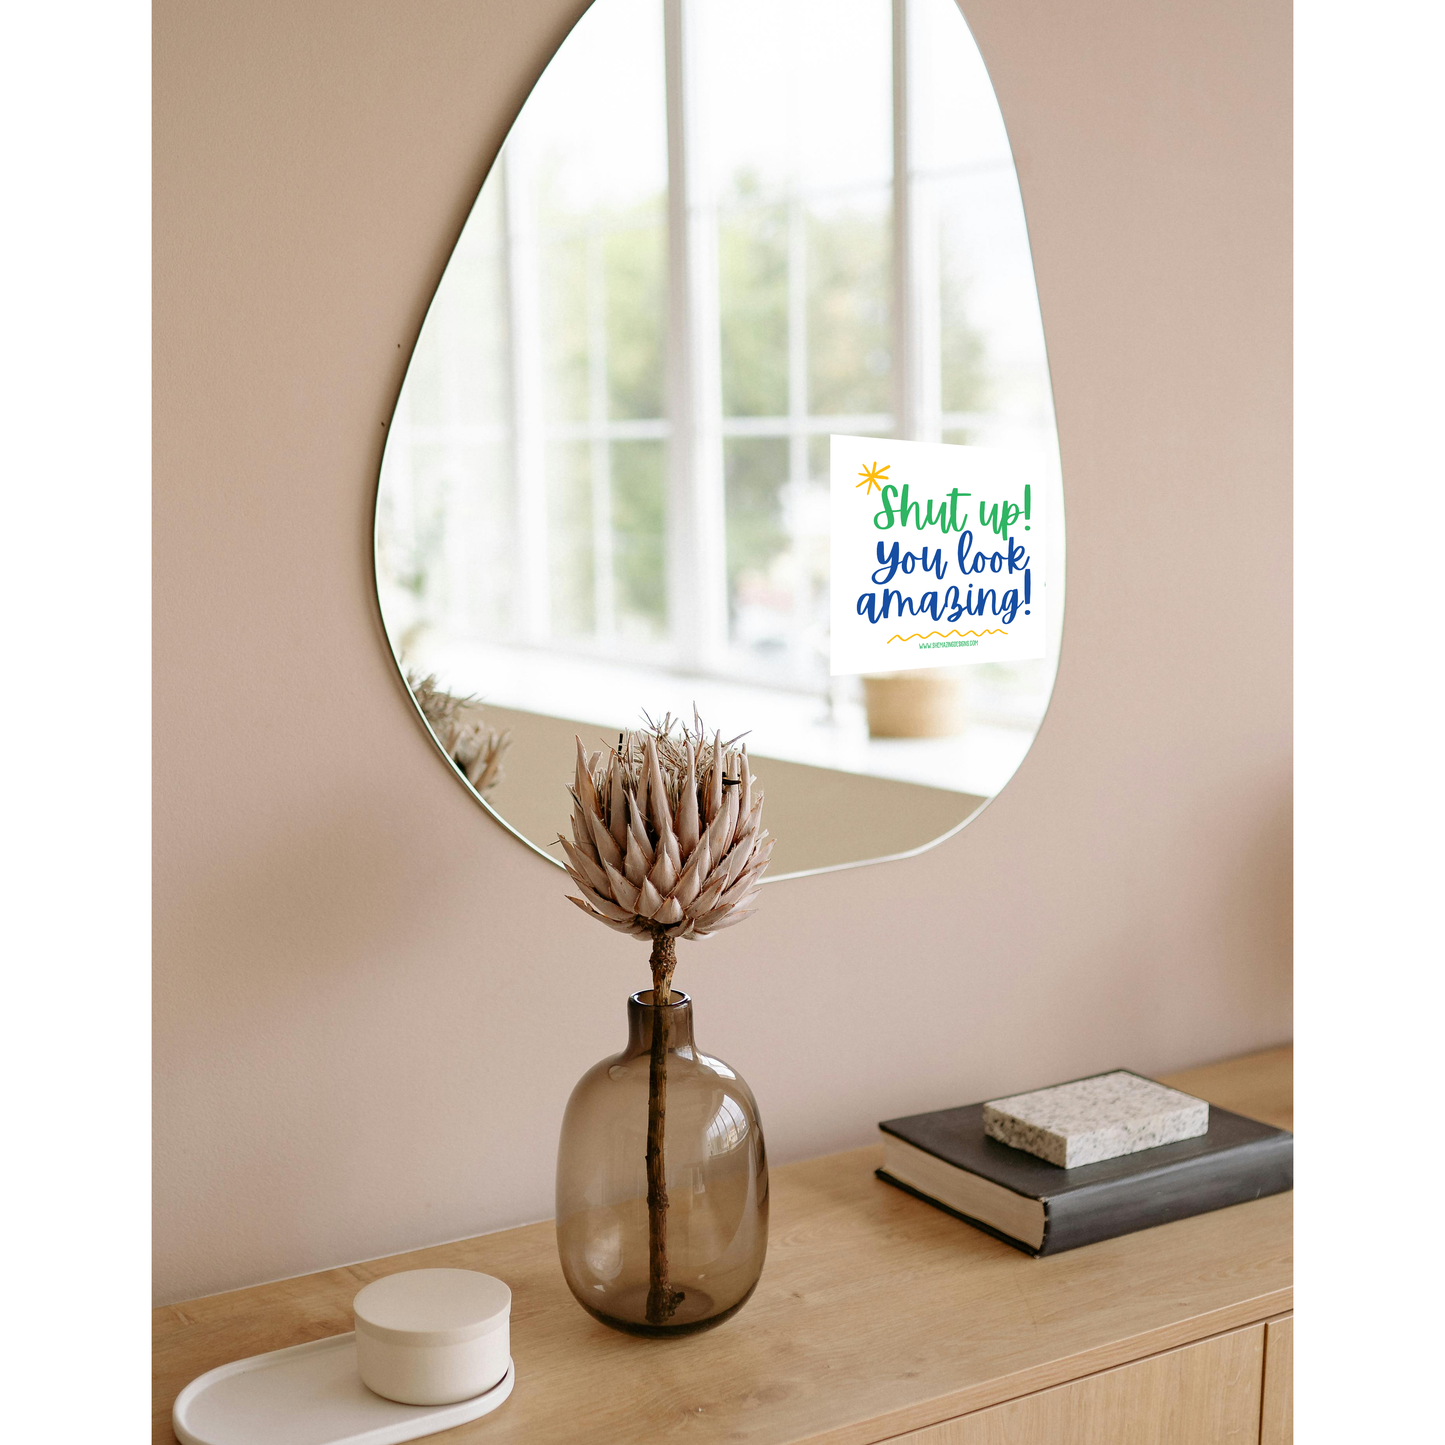 Shut Up! You Look Amazing! Mirror Cling Decal